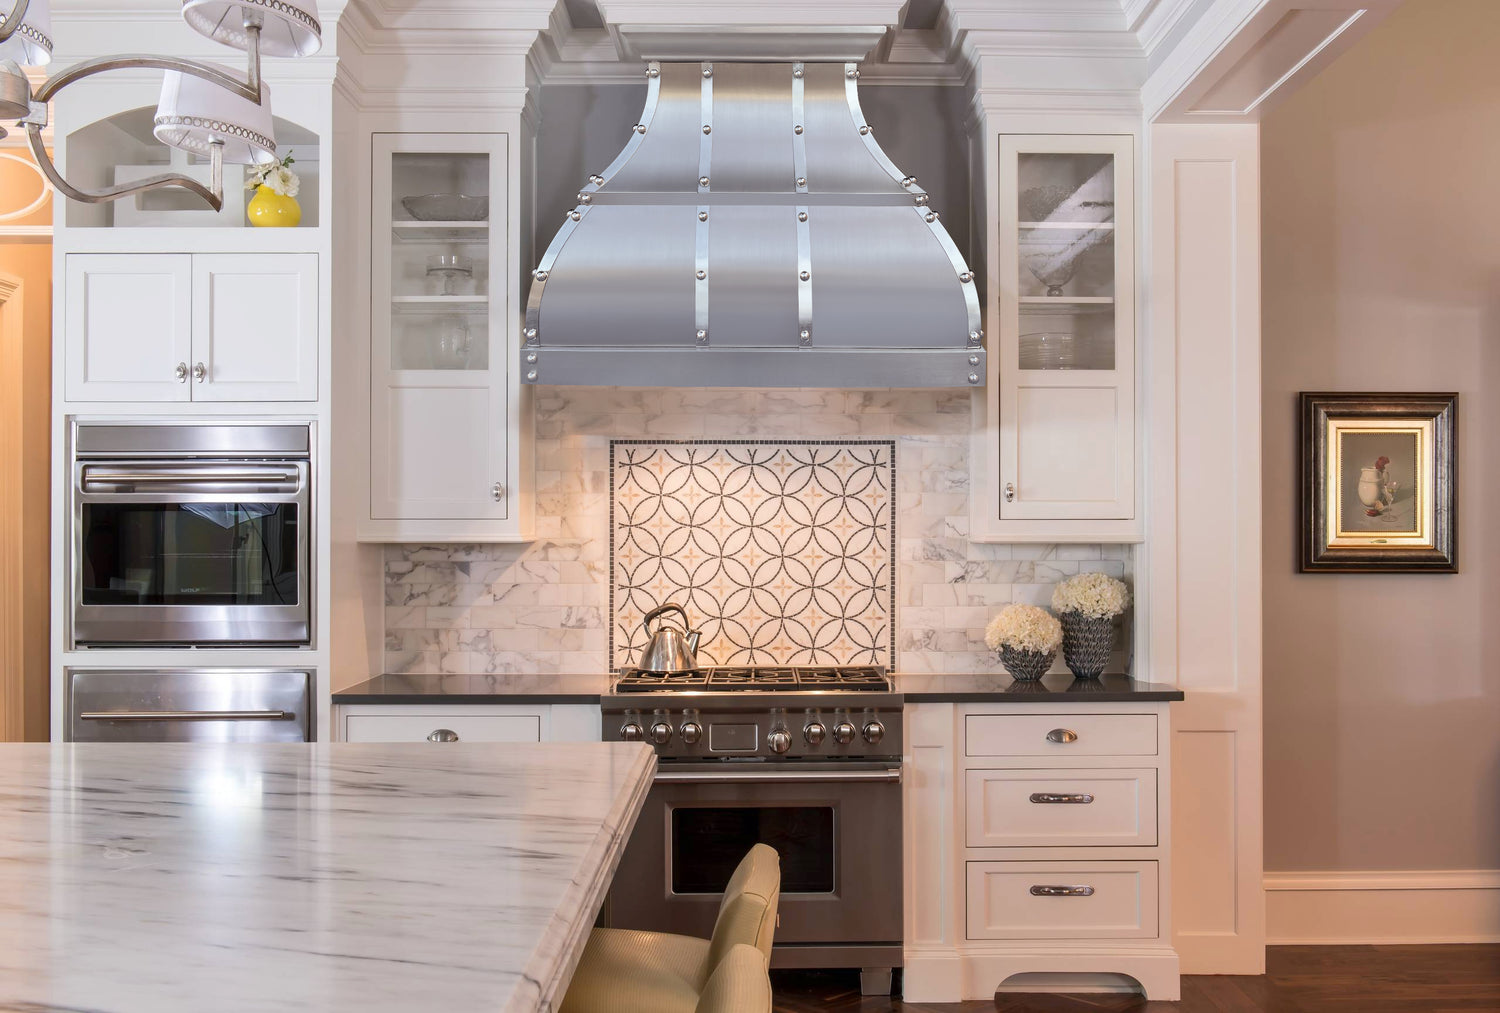 How to Choose the Best Dimension for a Custom Range Hood